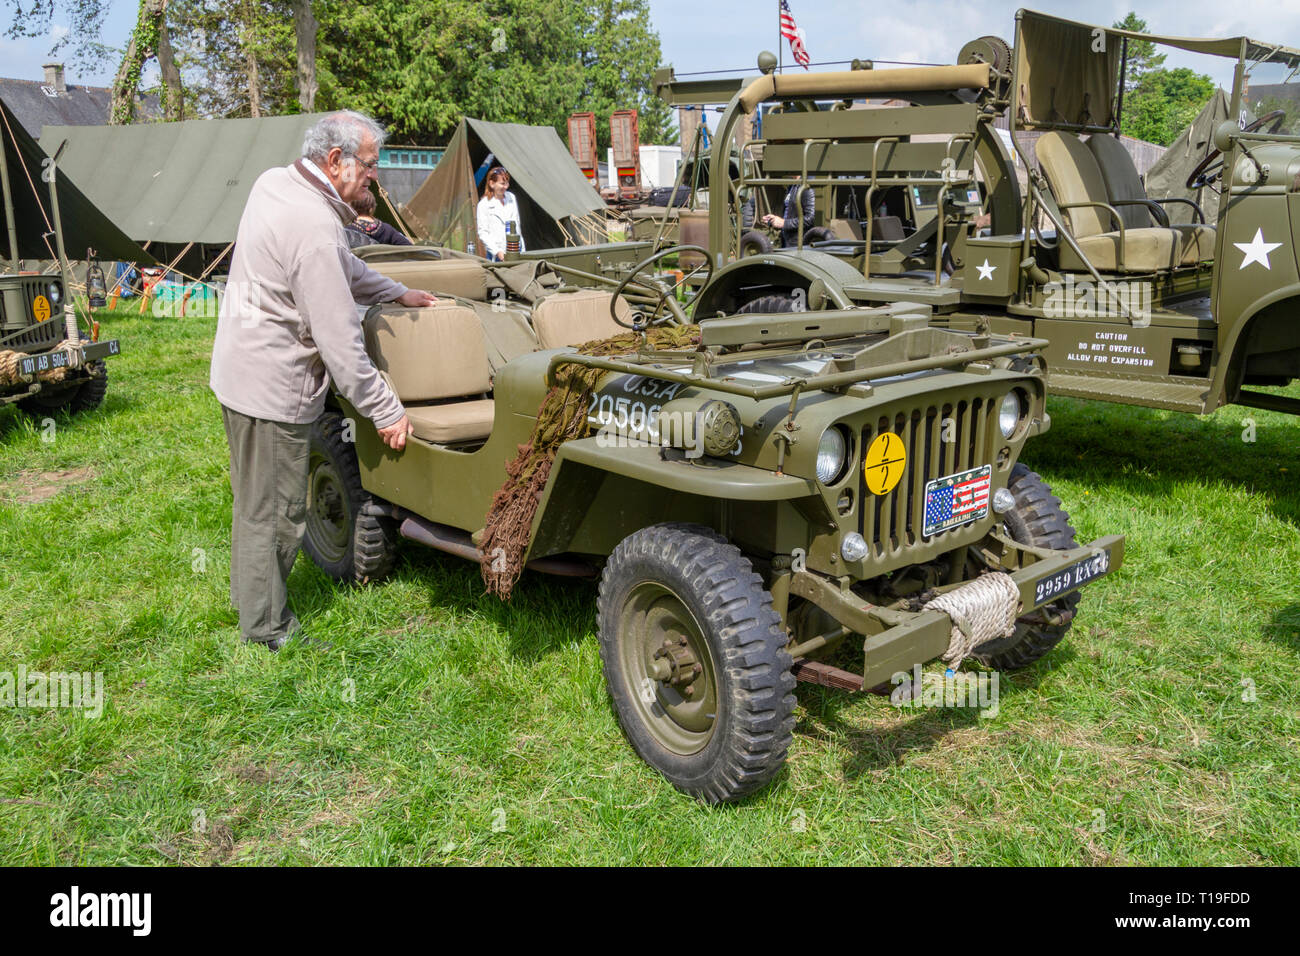 A Willys MB jeep, part of the D-Day 70th Anniversary events, re-enactors and vehicle displays in Sainte-Mère-Église, Normandy, France in June 2014. Stock Photo